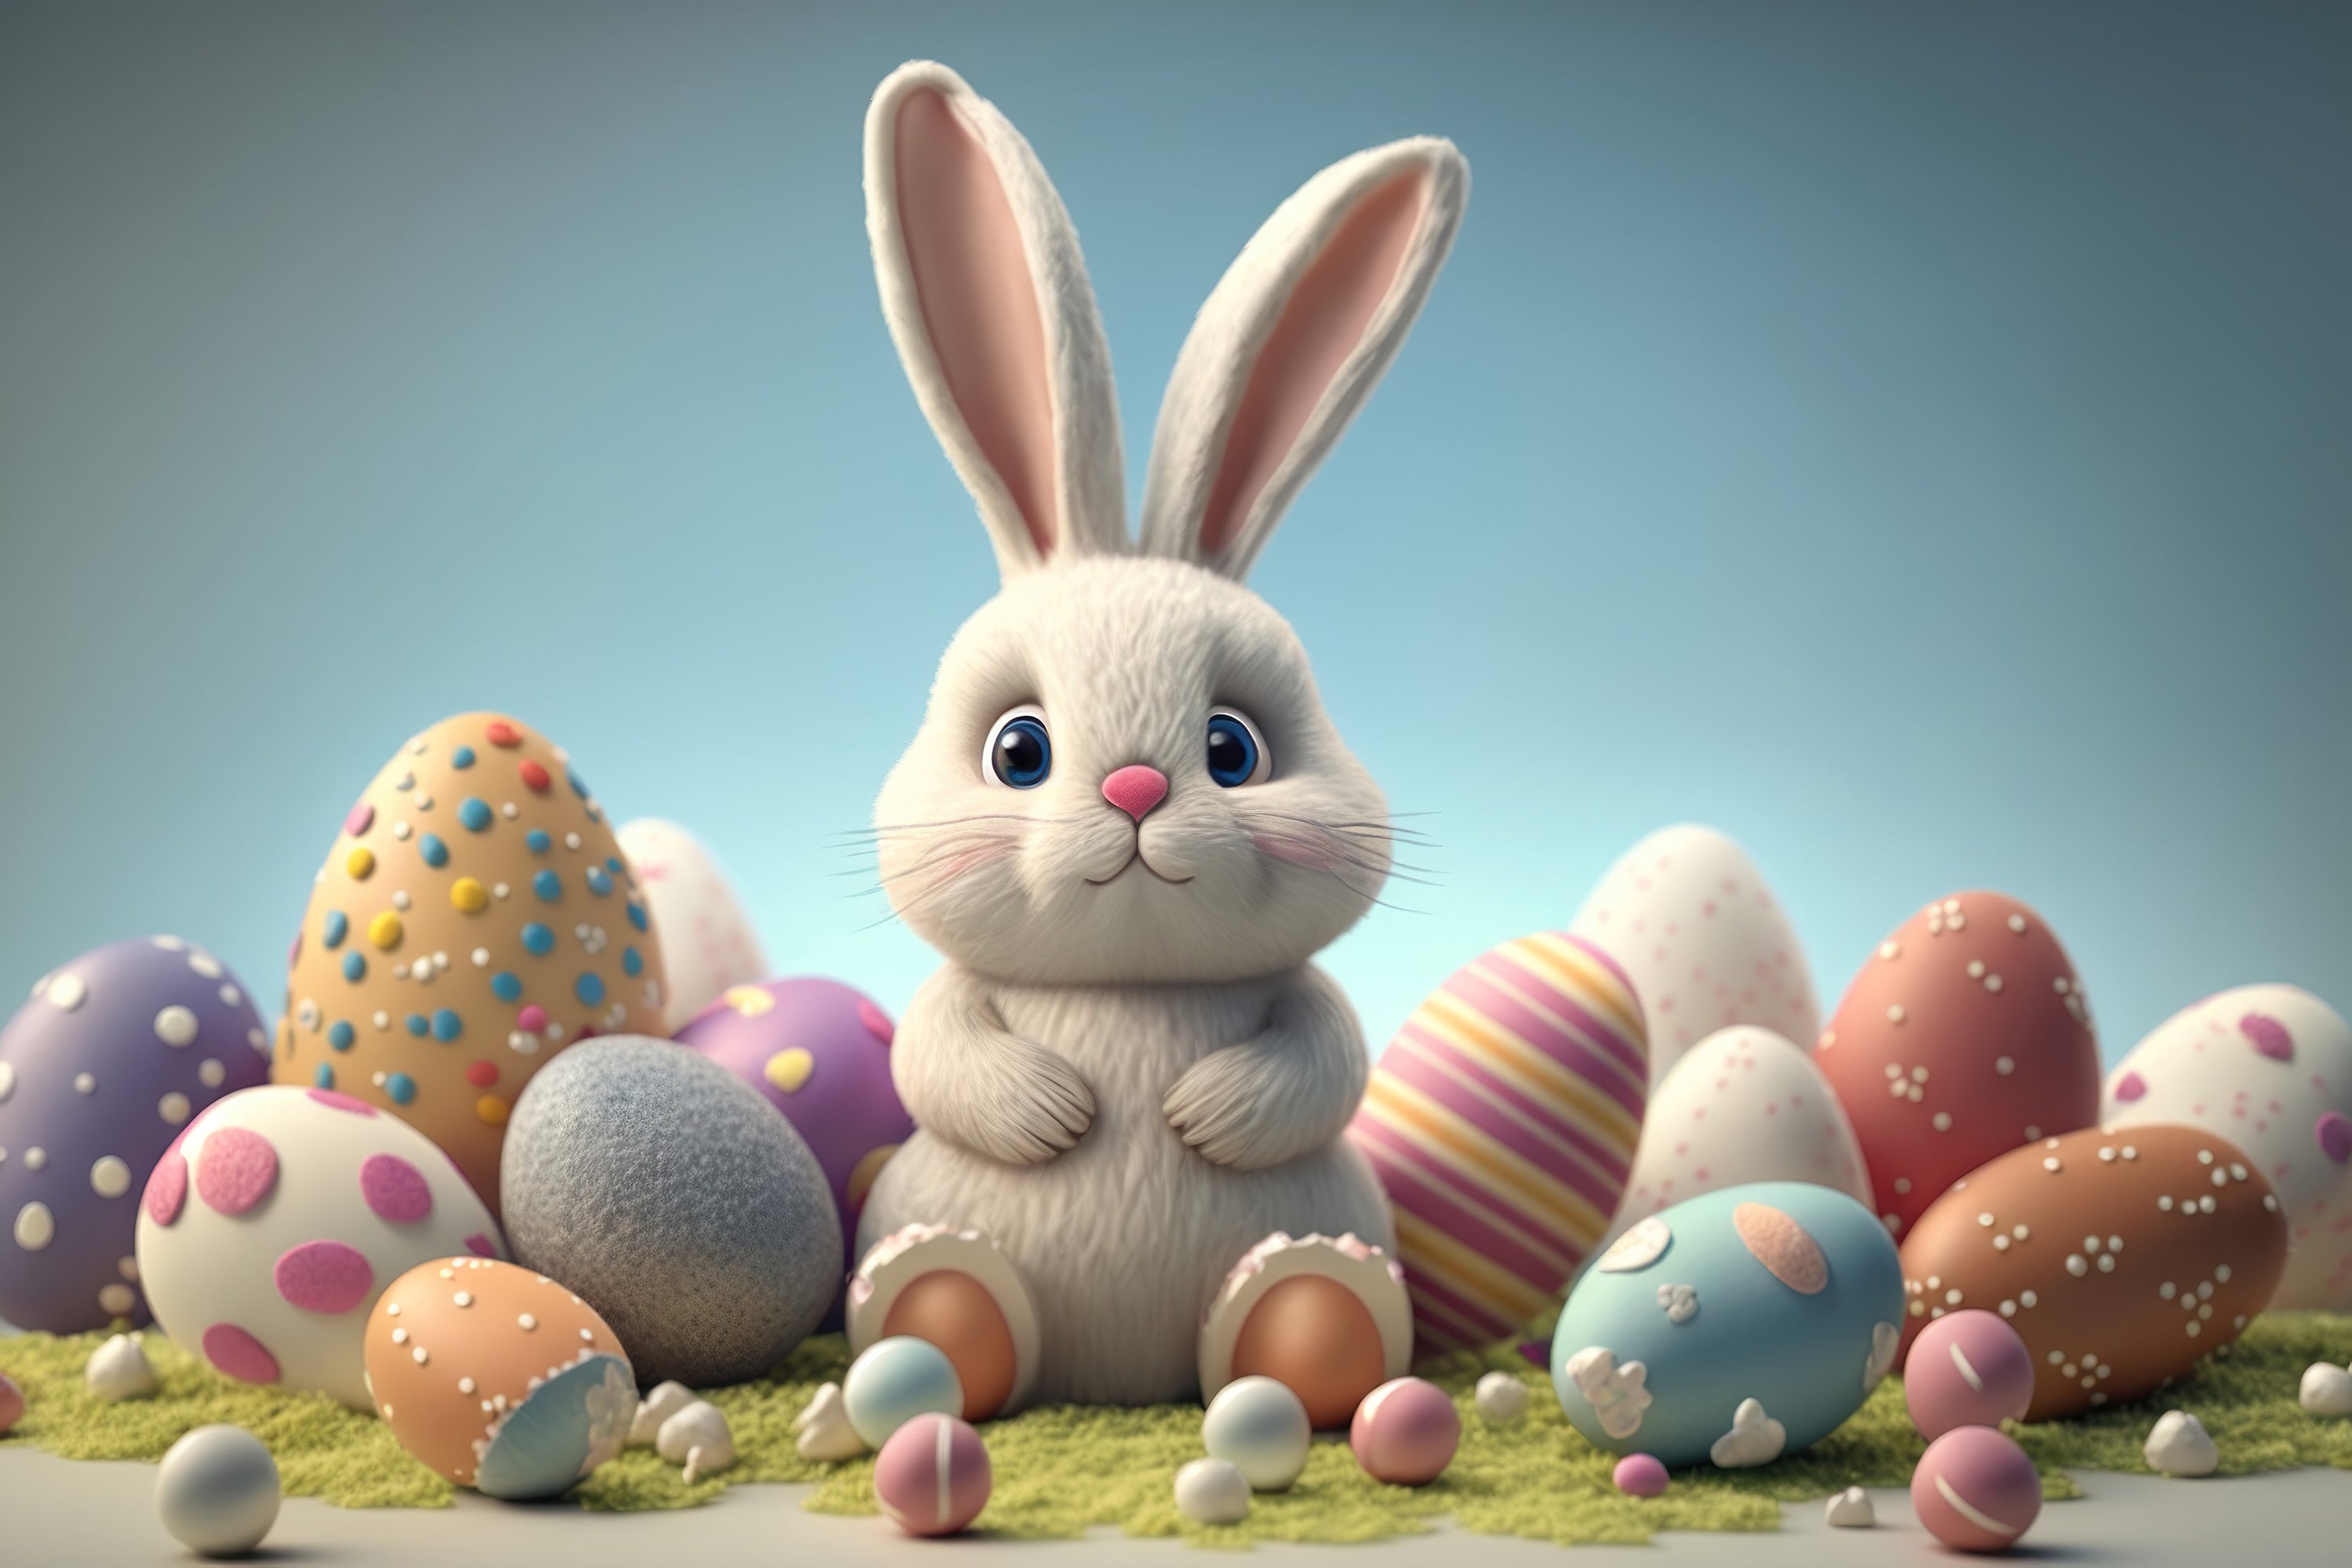 <a href="https://www.freepik.com/free-photo/happy-bunny-with-many-easter-eggs-grass-festive-background-decorative-design_38121621.htm#query=easter%202024&position=1&from_view=keyword&track=ais&uuid=c2d16807-6134-4493-9846-407b5f569f83">Image by svstudioart</a> on Freepik